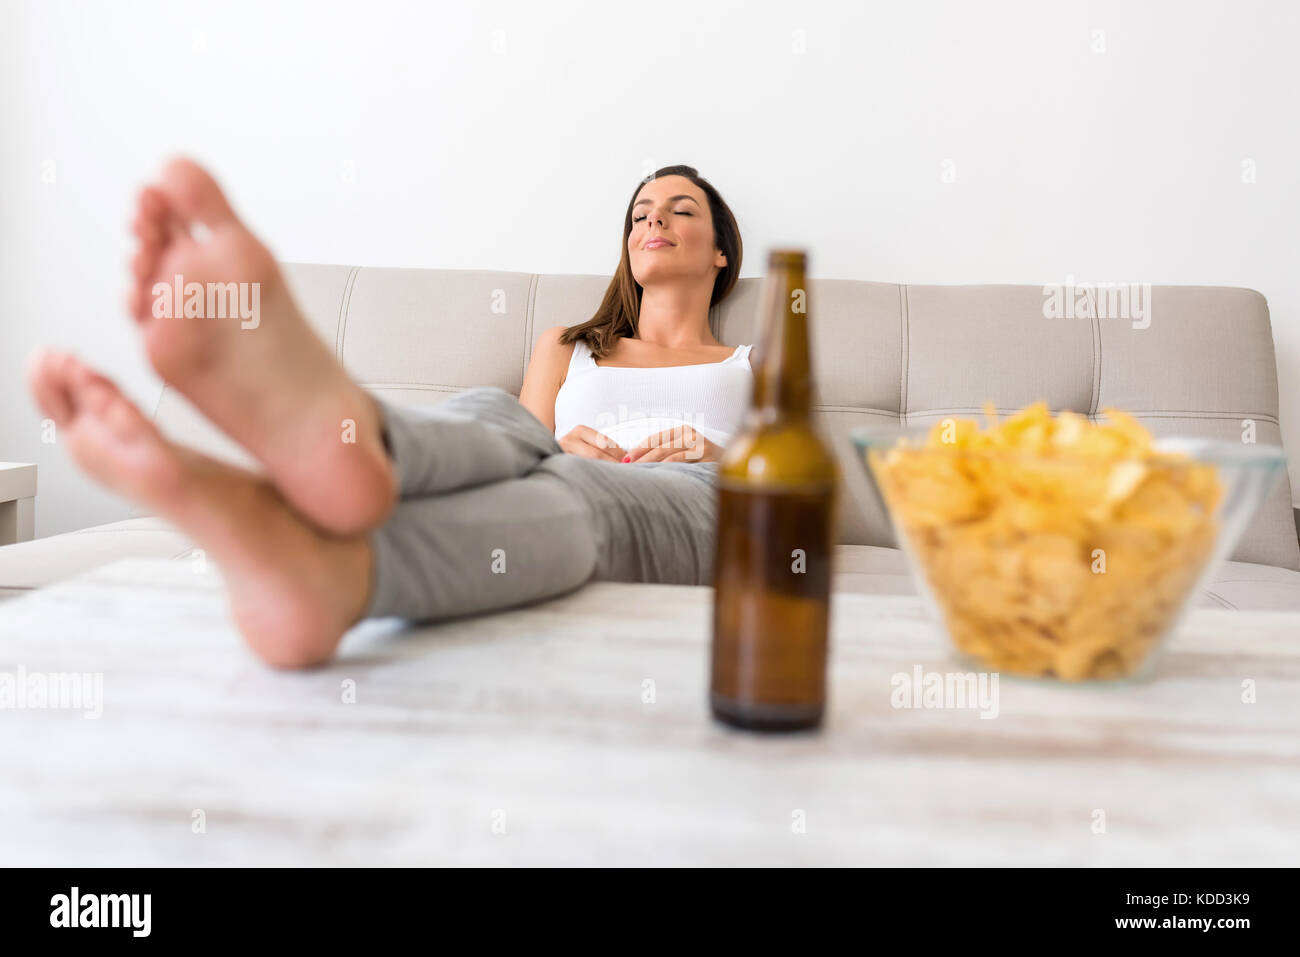 Couch Potato Queens: Embracing the Art of Relaxation